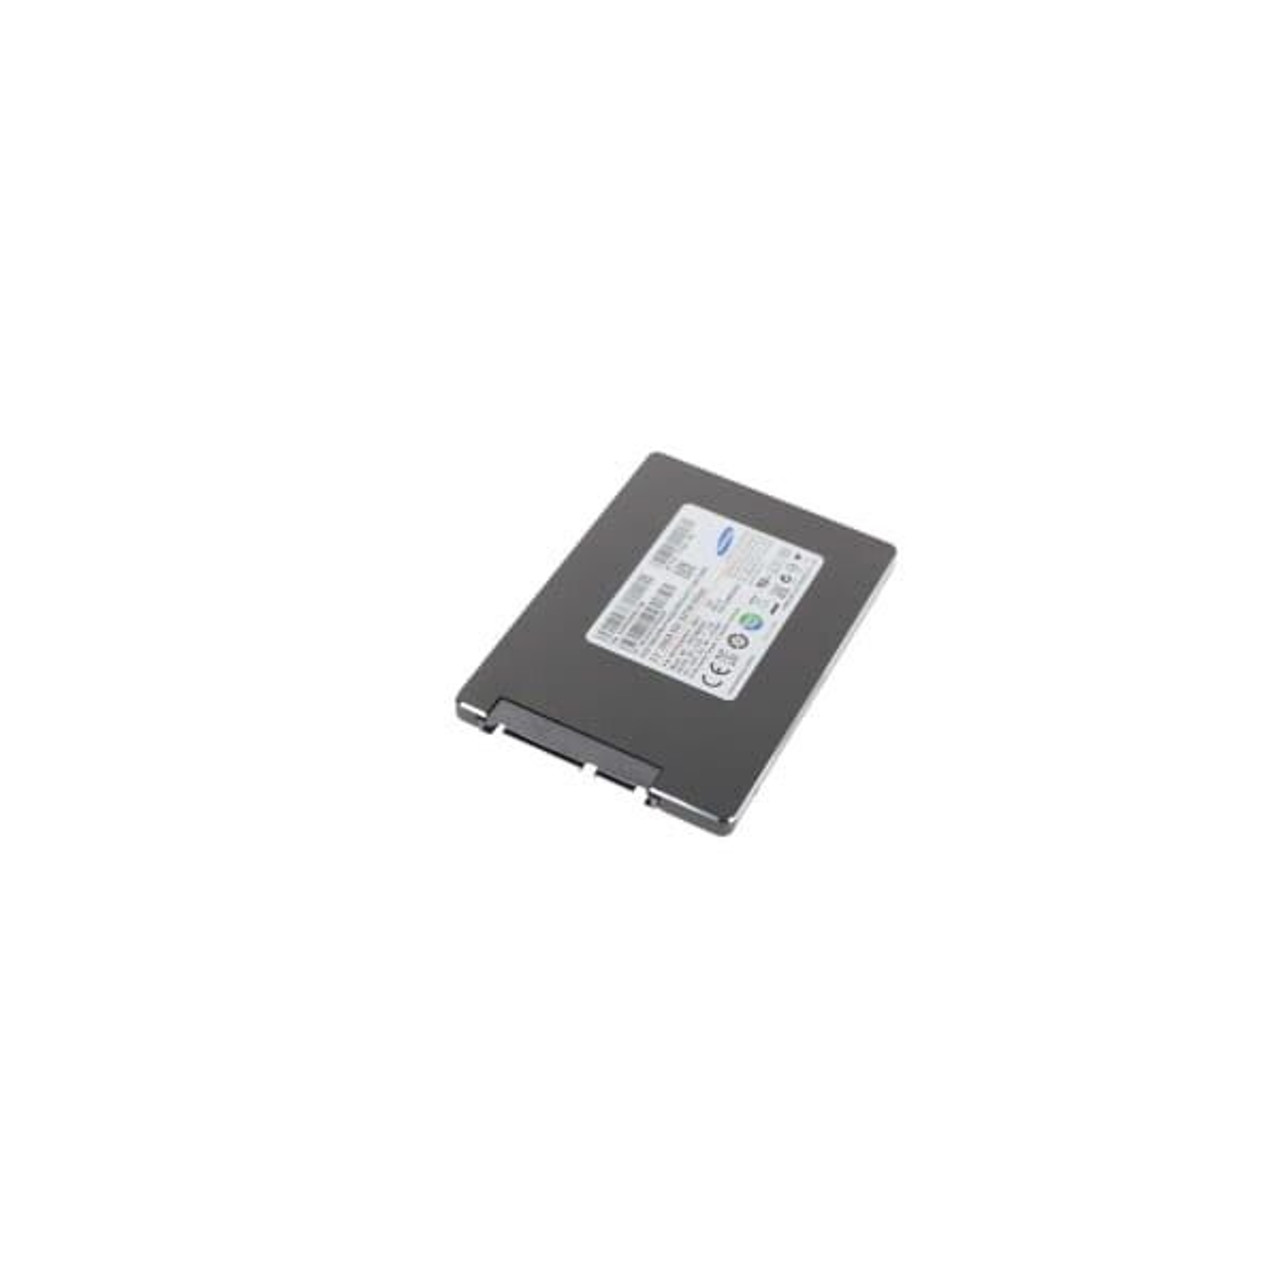 HP 717354-001 256GB 6G 2.5" SATA Solid State Drive zxy